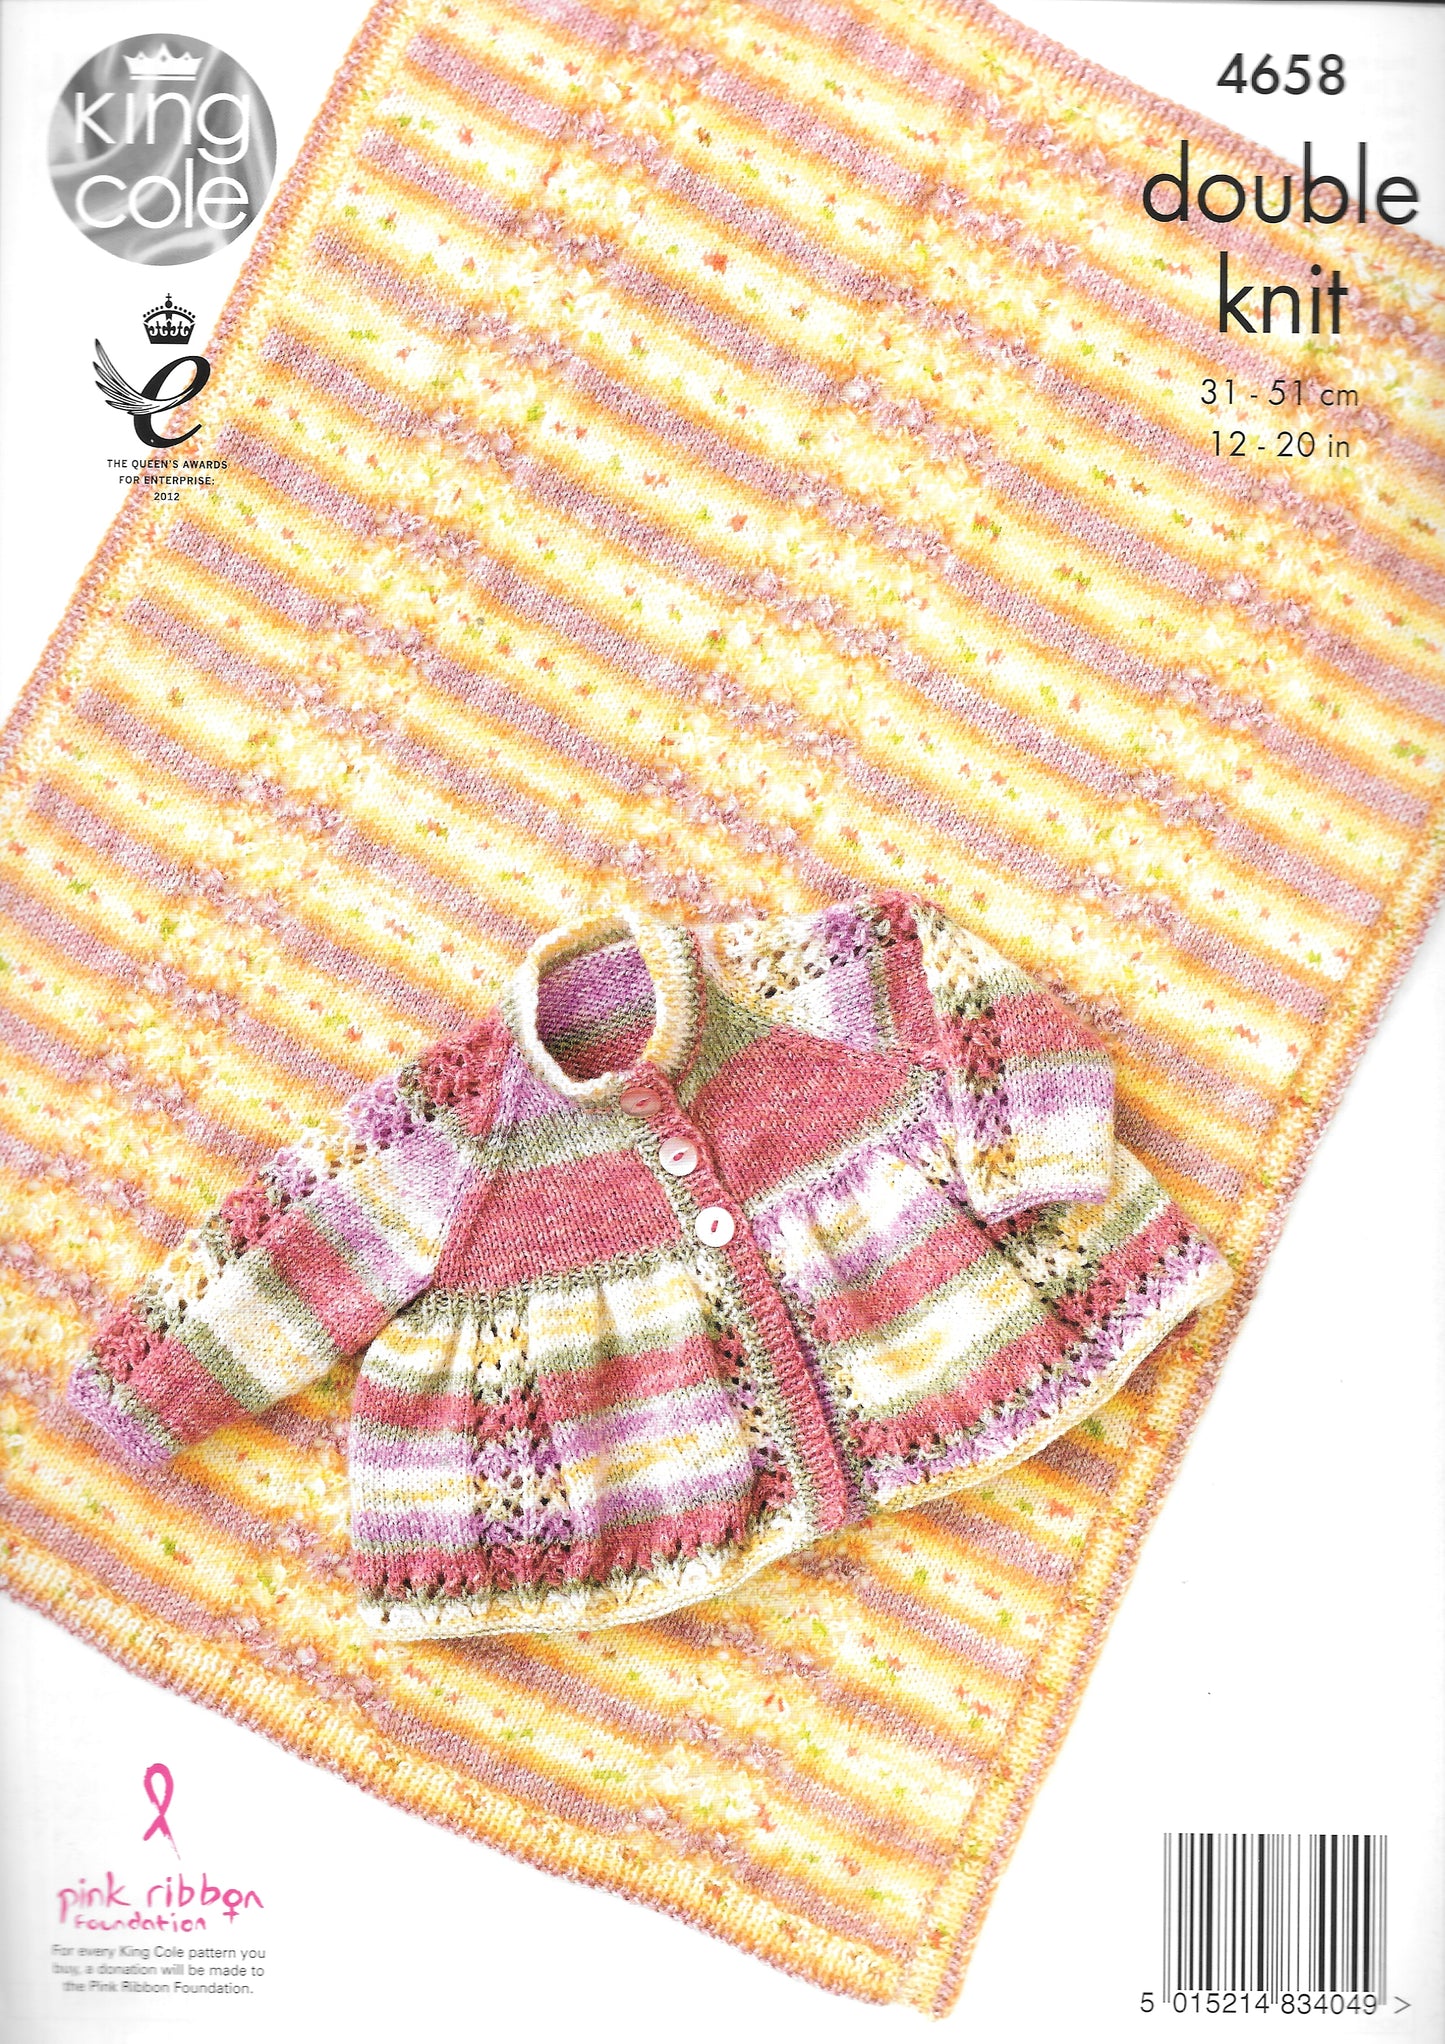 4658 King Cole Double Knit Baby Jacket and Blanket knitting pattern